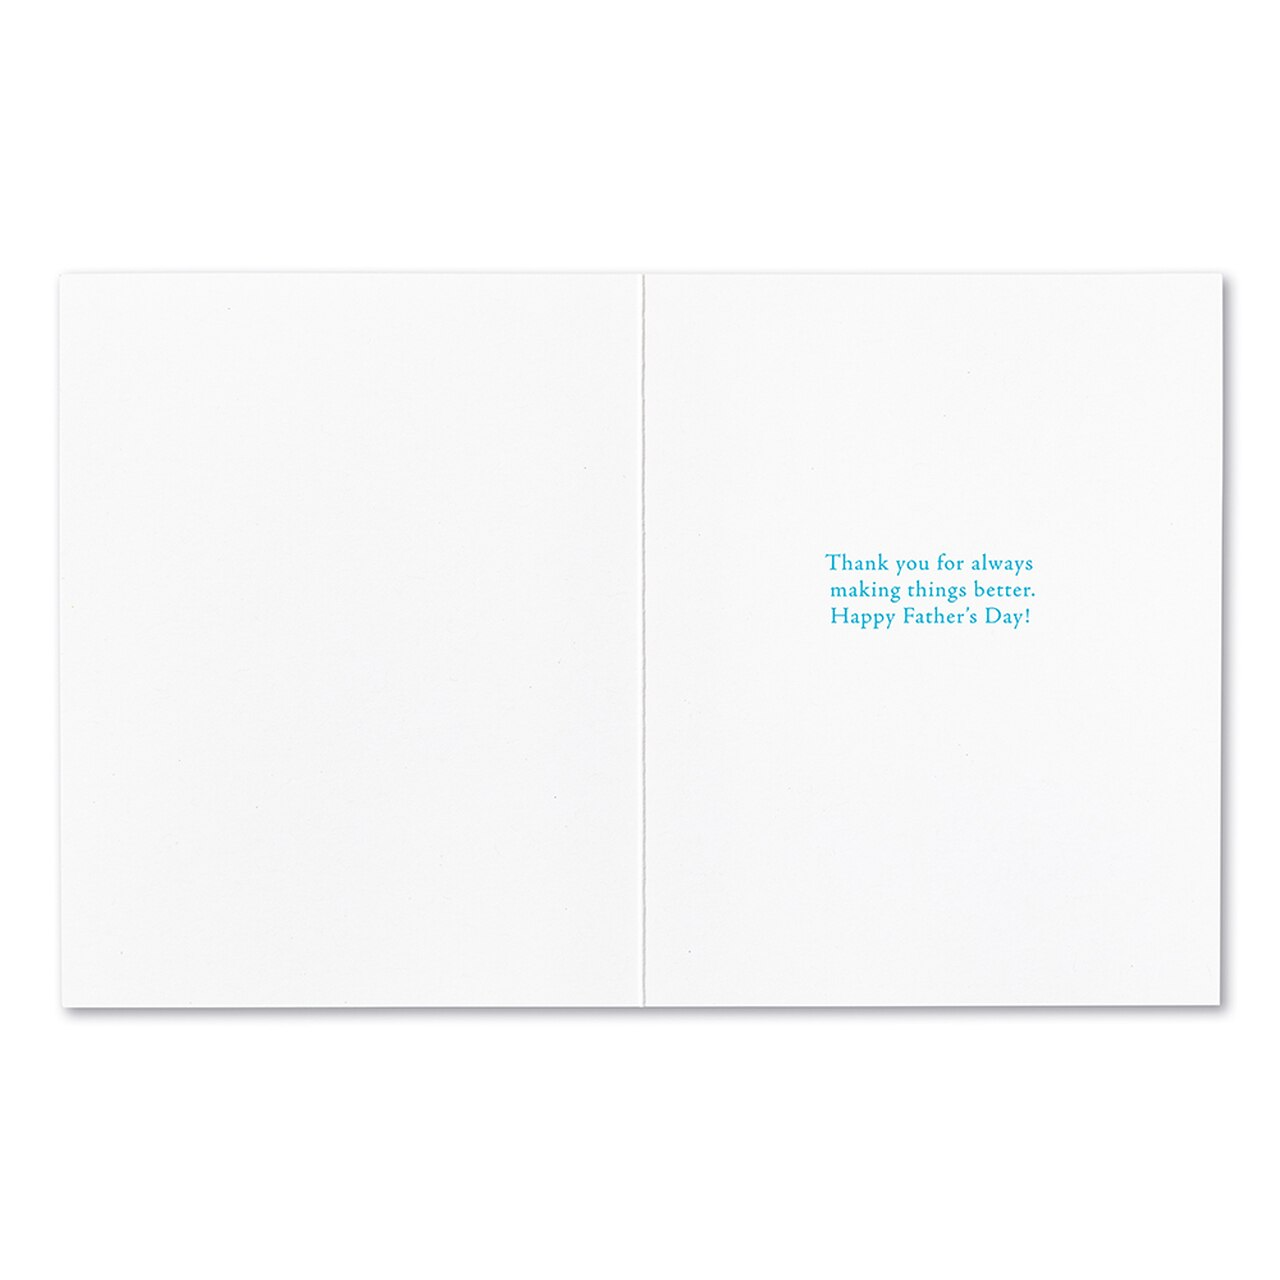 Positively Green Greeting Card - Father's Day - “Caring is the greatest thing, caring matters most.” —Friedrich von Hügel - Mellow Monkey